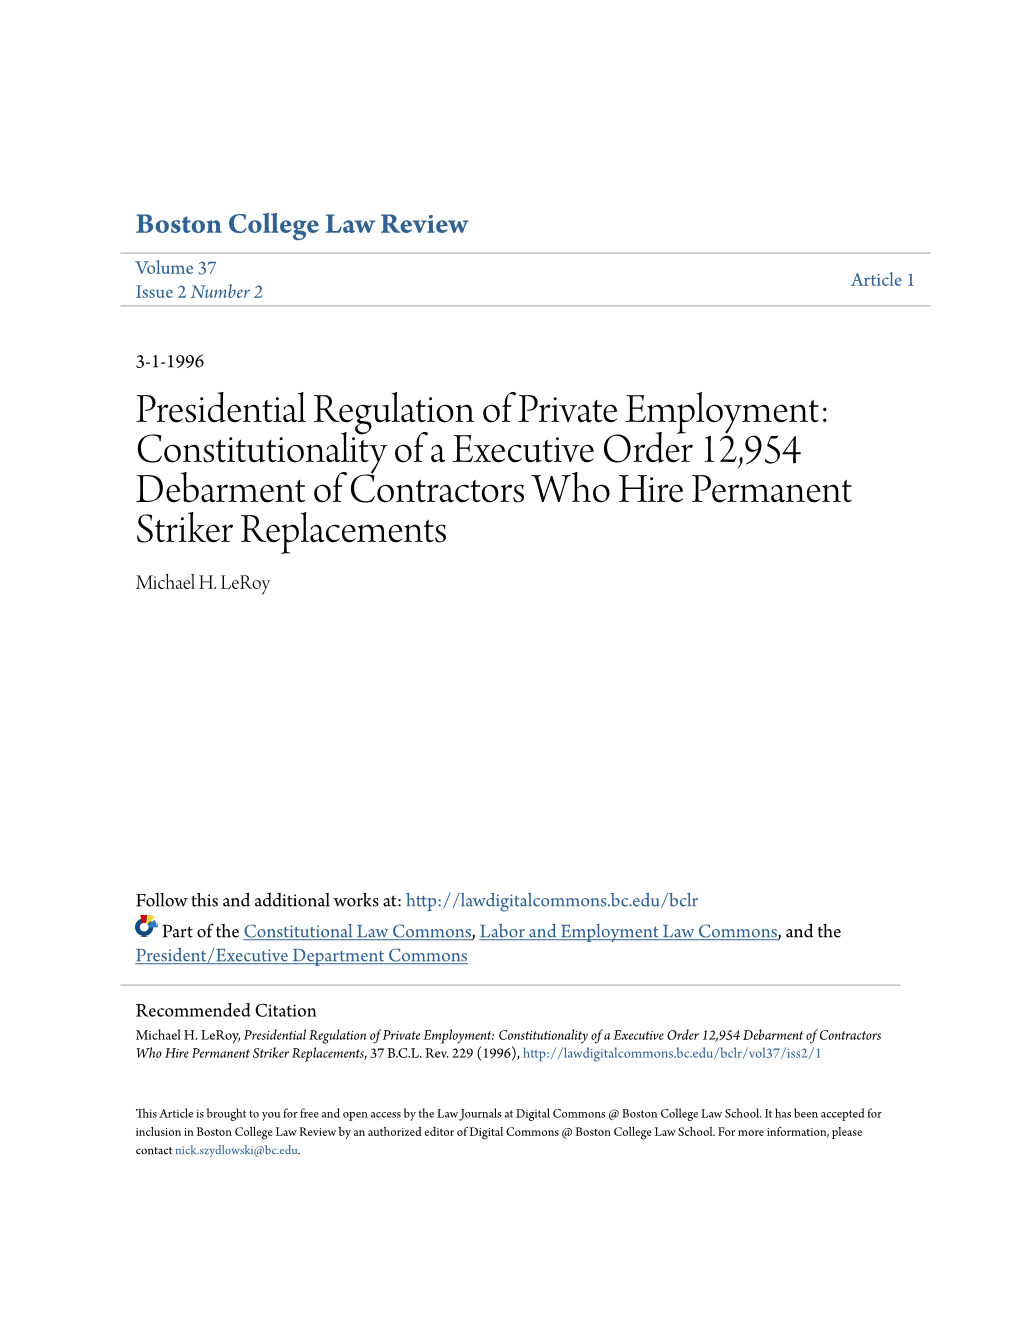 Presidential Regulation of Private Employment: Constitutionality of A